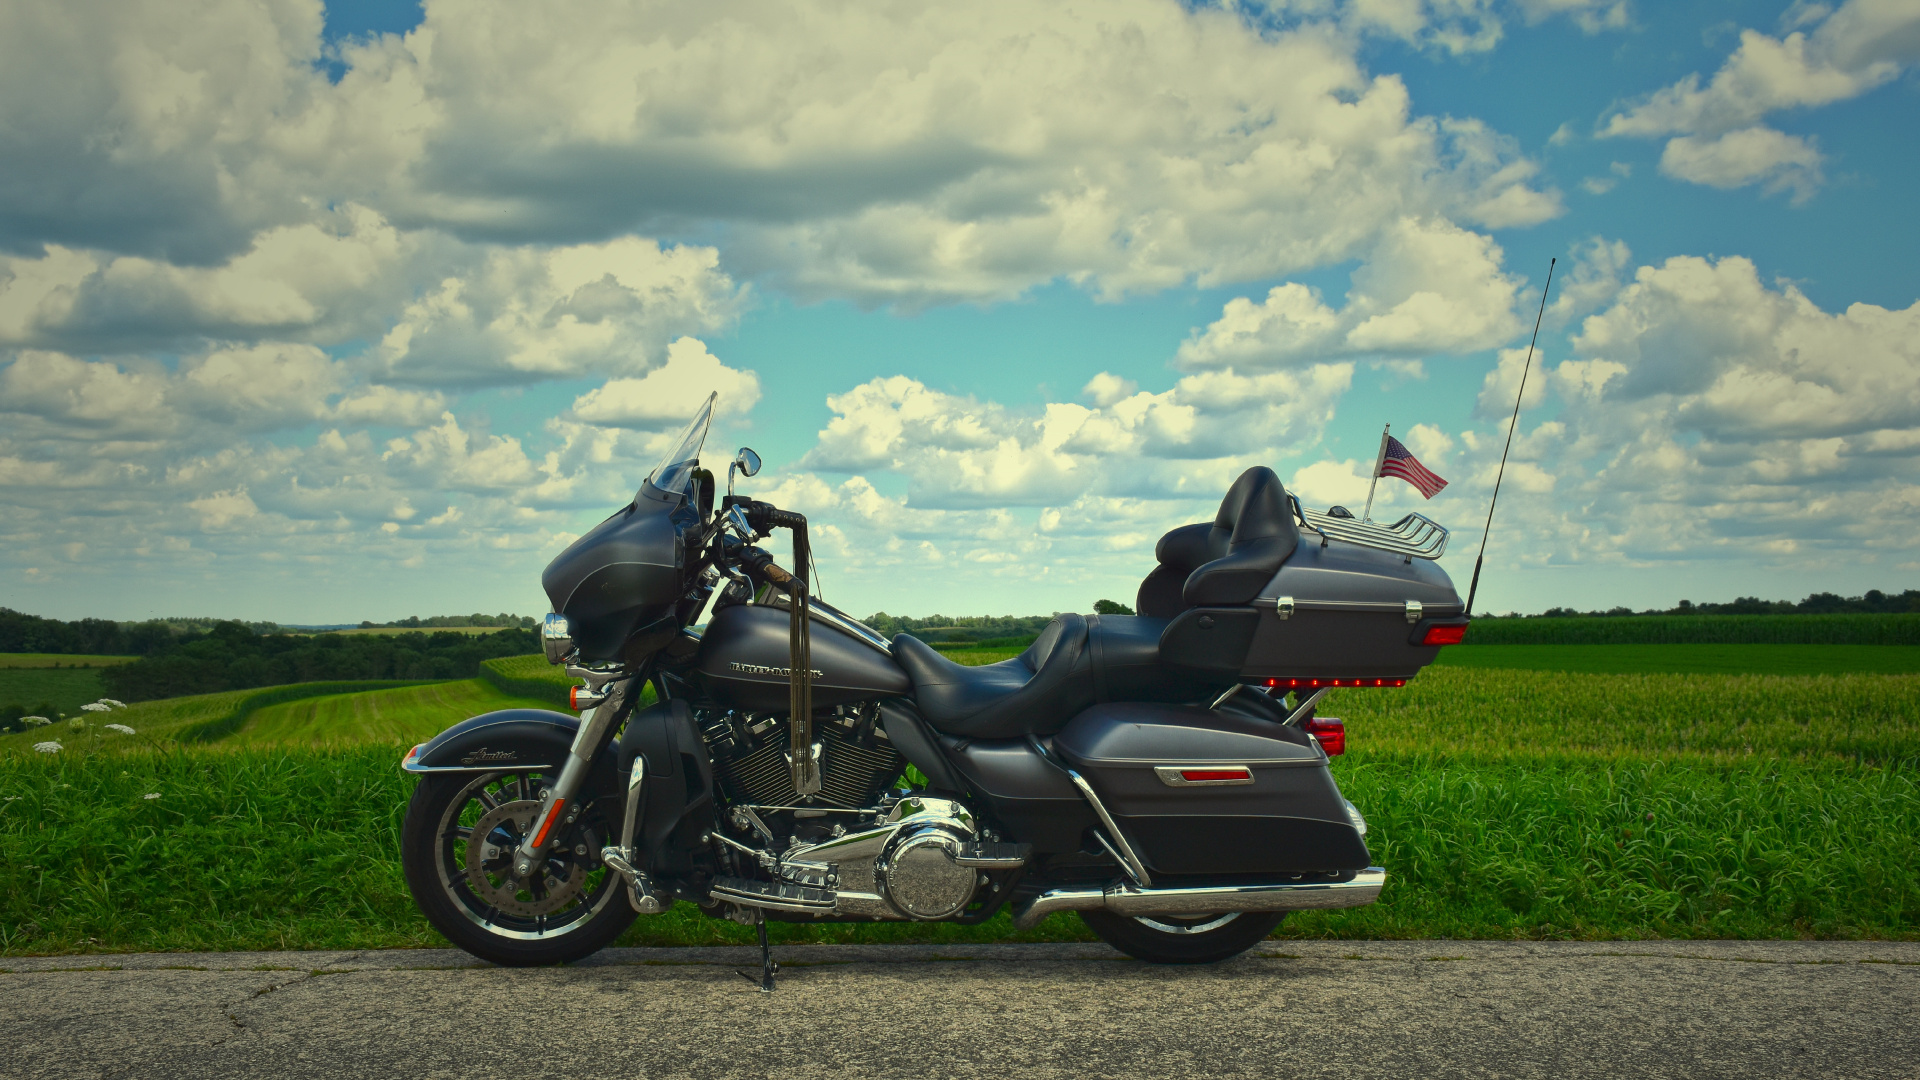 Black and White Sports Bike on Green Grass Field Under White Clouds and Blue Sky During. Wallpaper in 1920x1080 Resolution